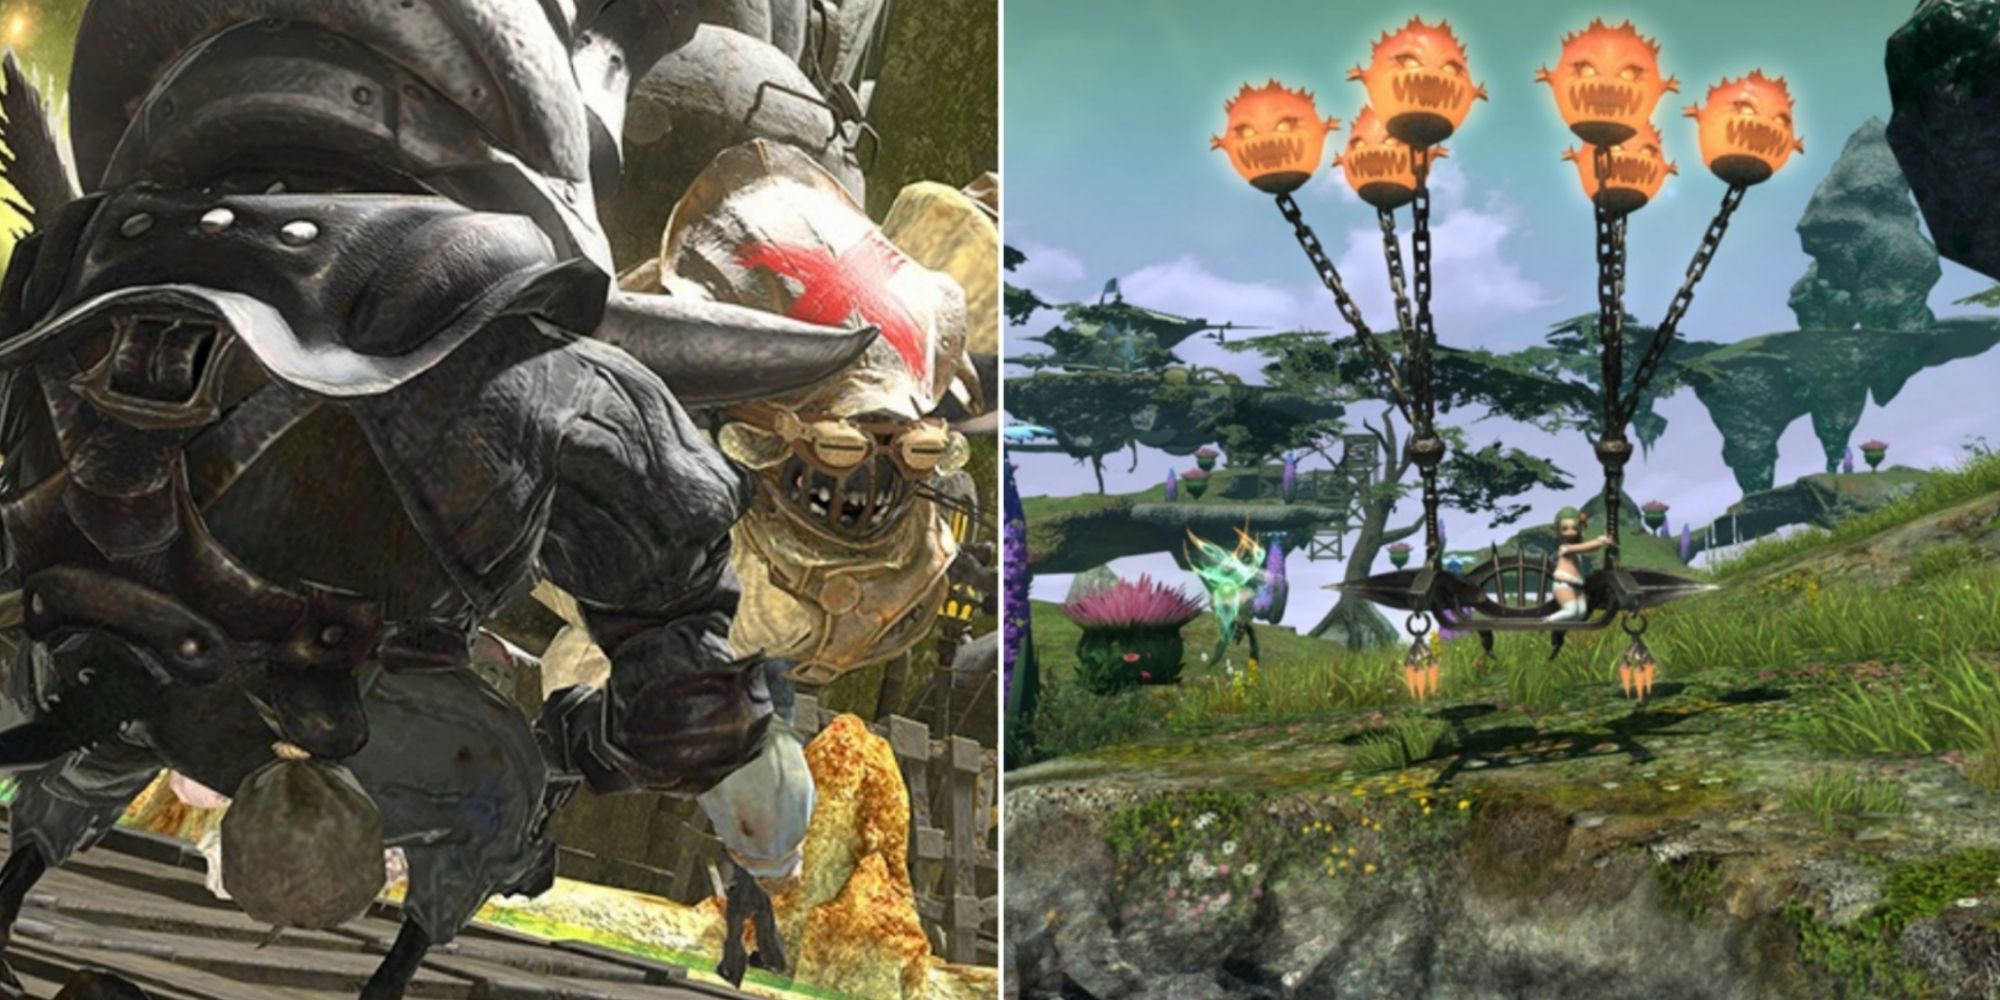 ff14 kobolds bomb palanquin and tribal quest  square enix and Freedom4556 Lina Poe